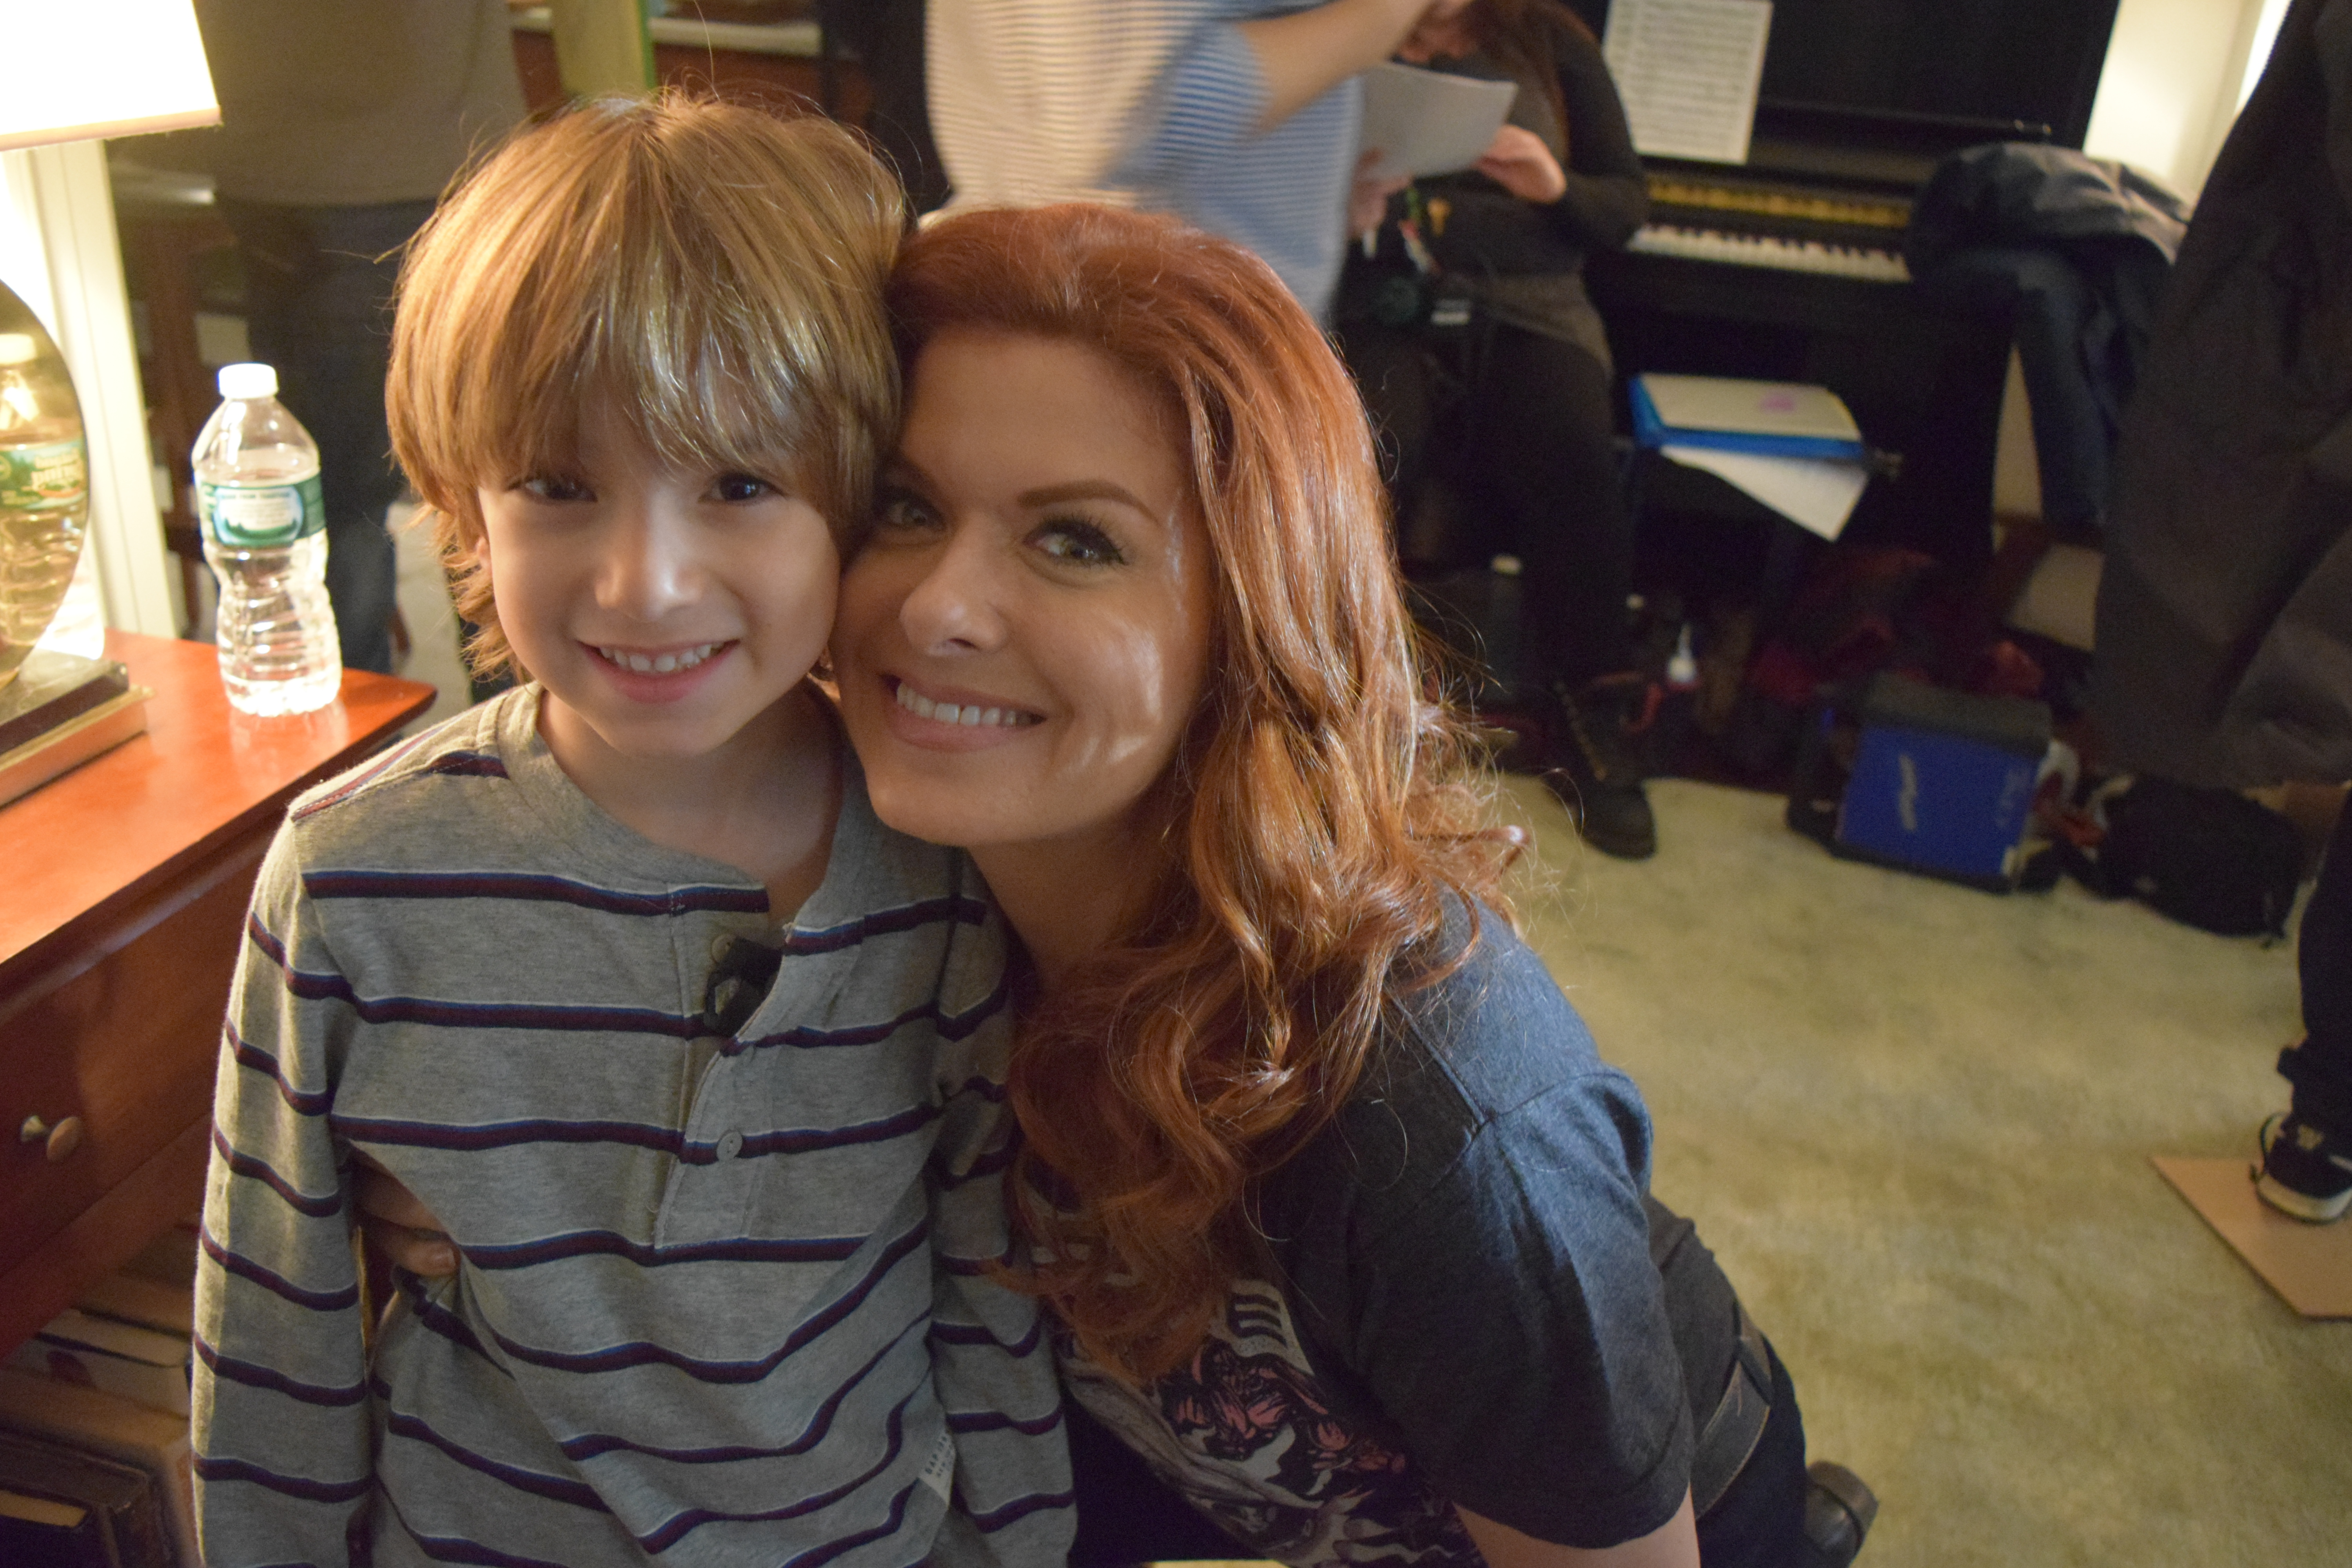 Azhy with the lovely Debra Messing on the set of Mysteries of Laura